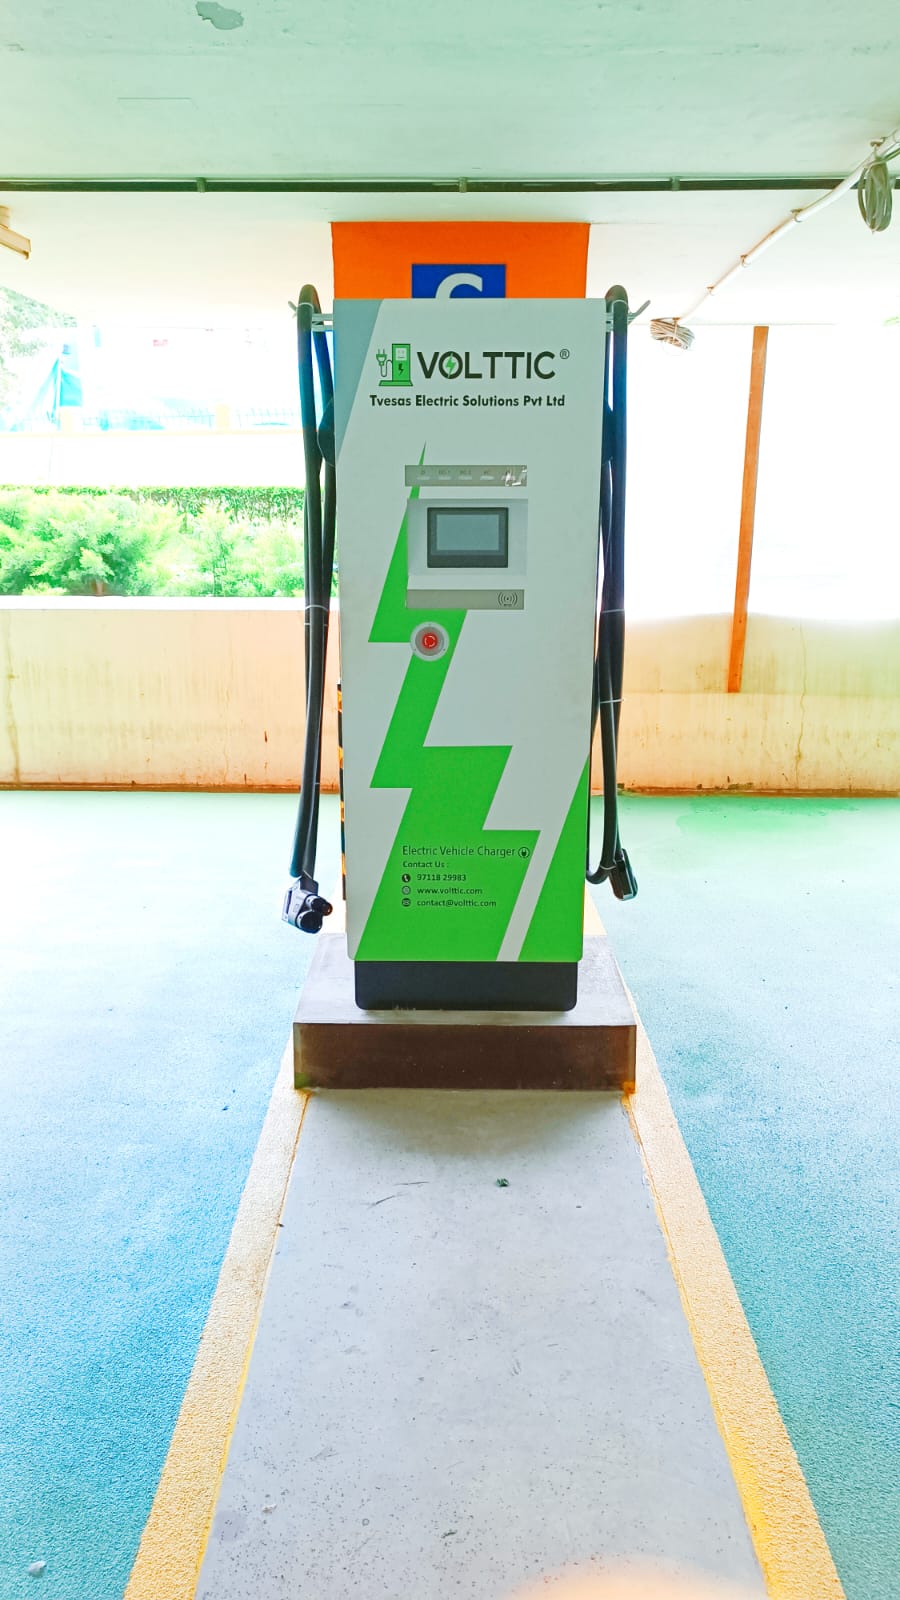 Volttic installed CCS2 DC fast charging stations at Bangalore Tech Park